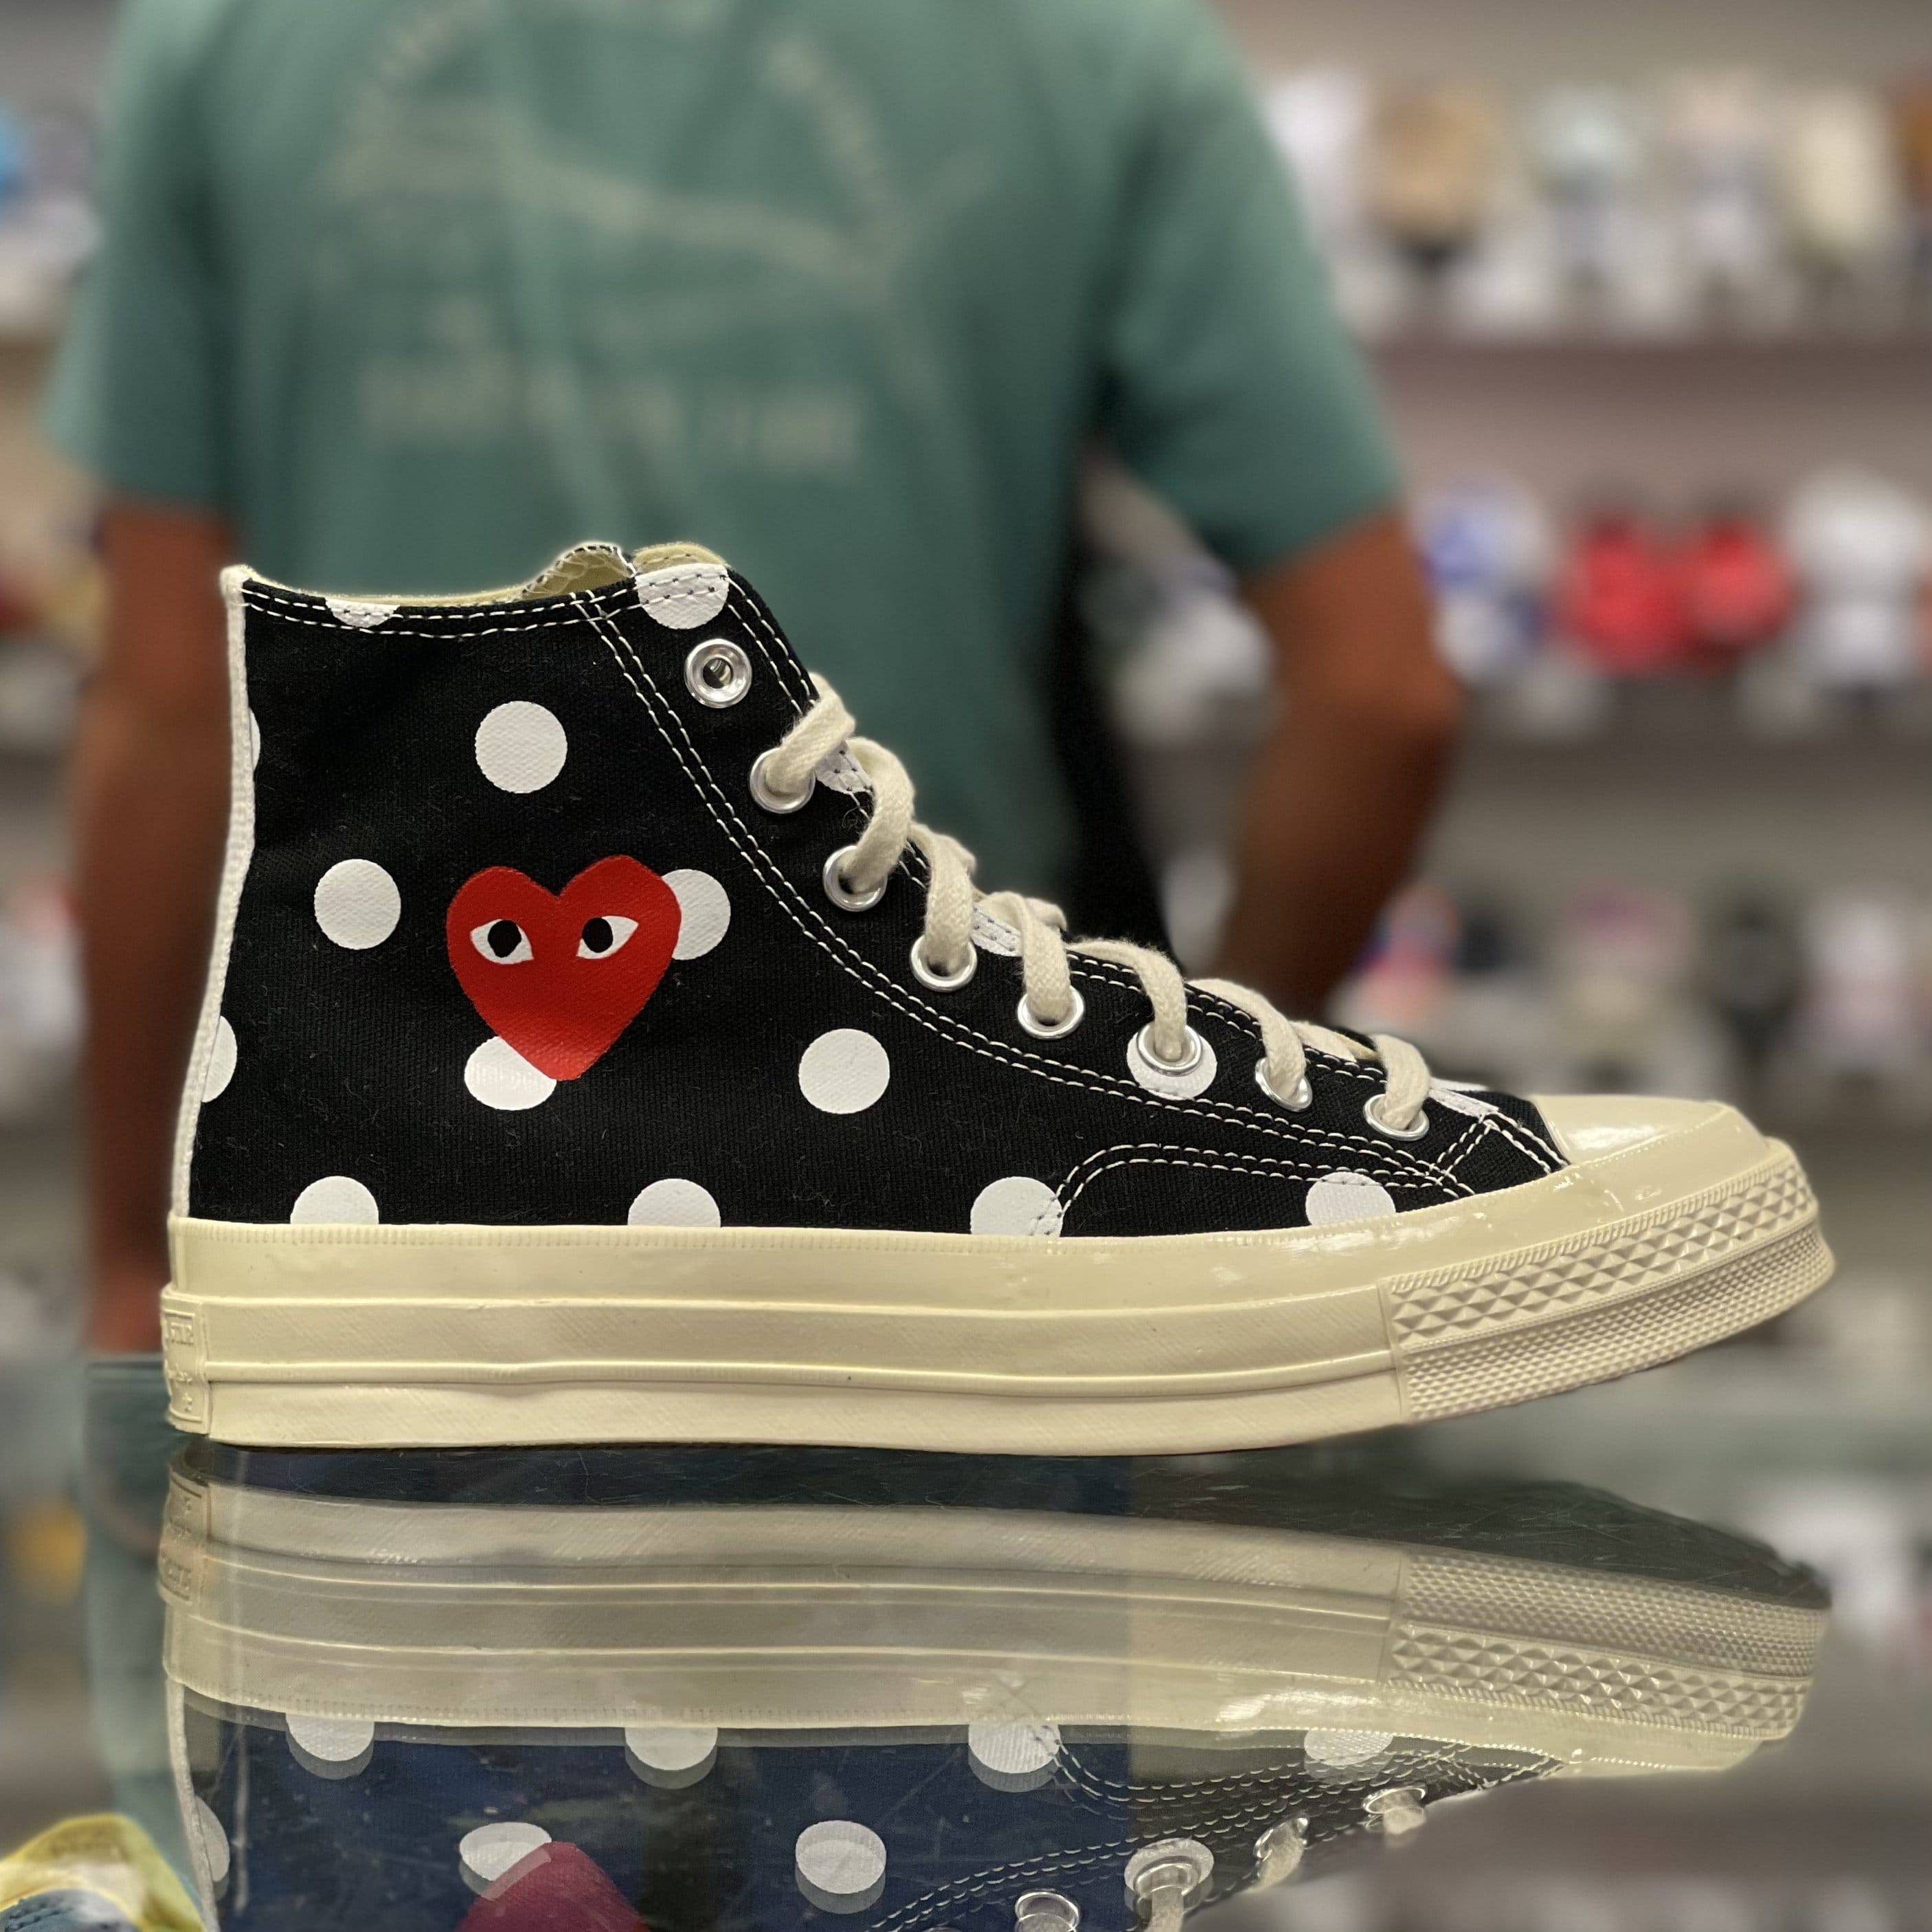 Converse Chuck Taylor CDG High | Request